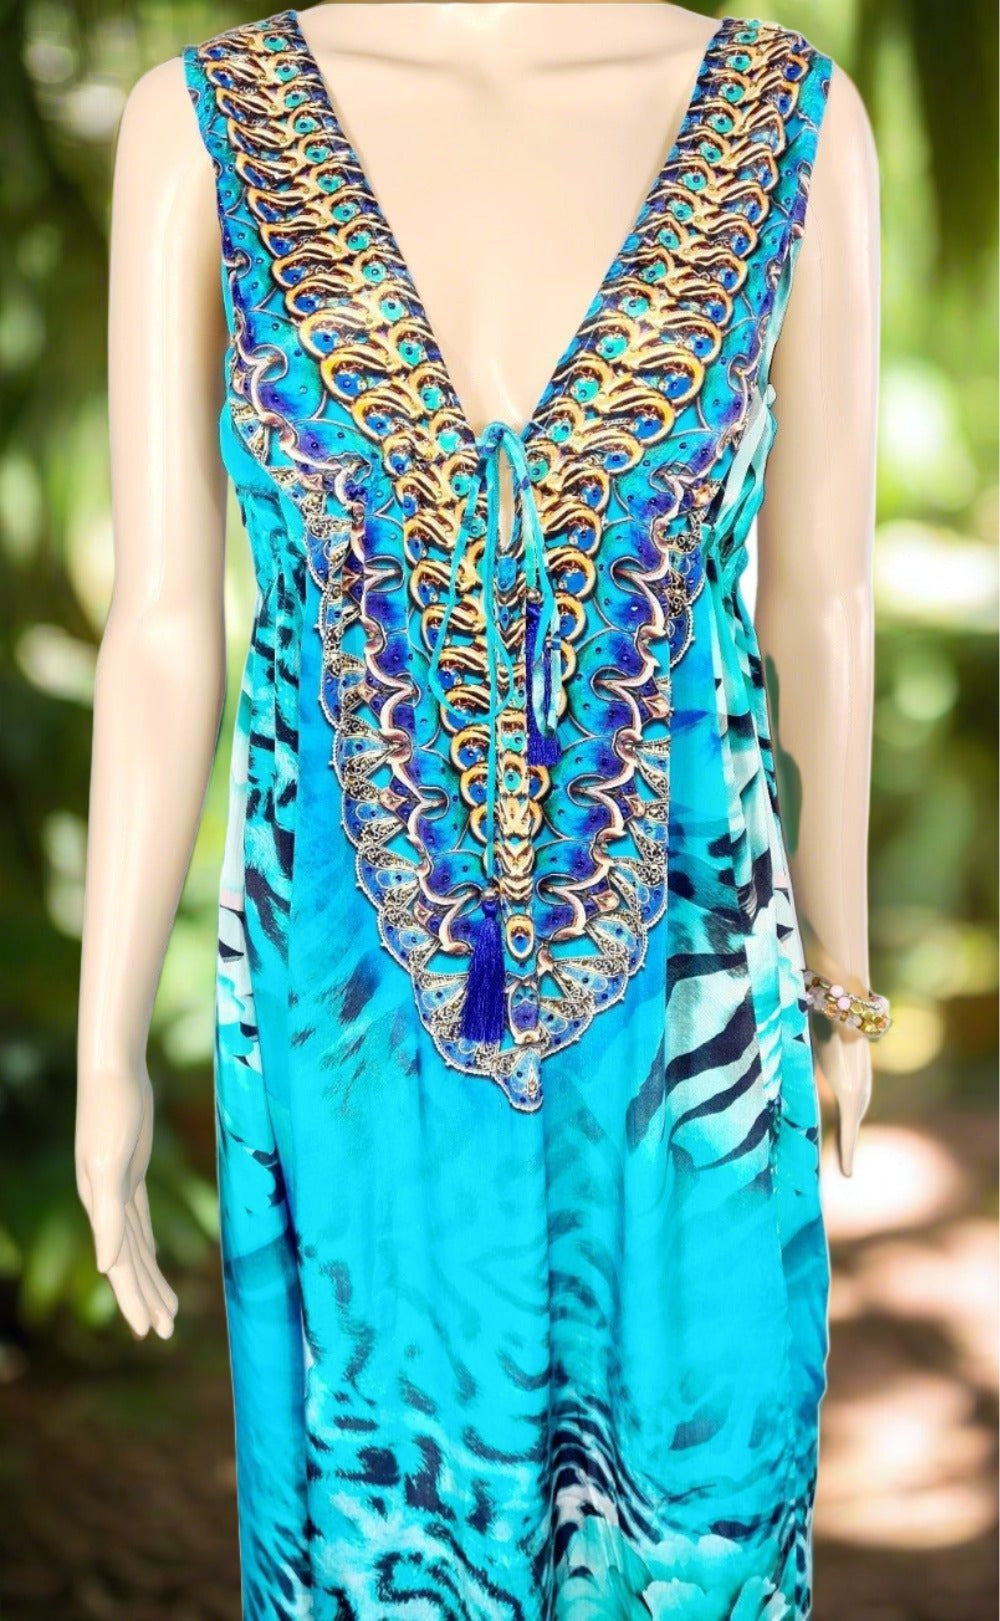 Into the Wild Front Split Maxi Dress - Kaftans that Bling